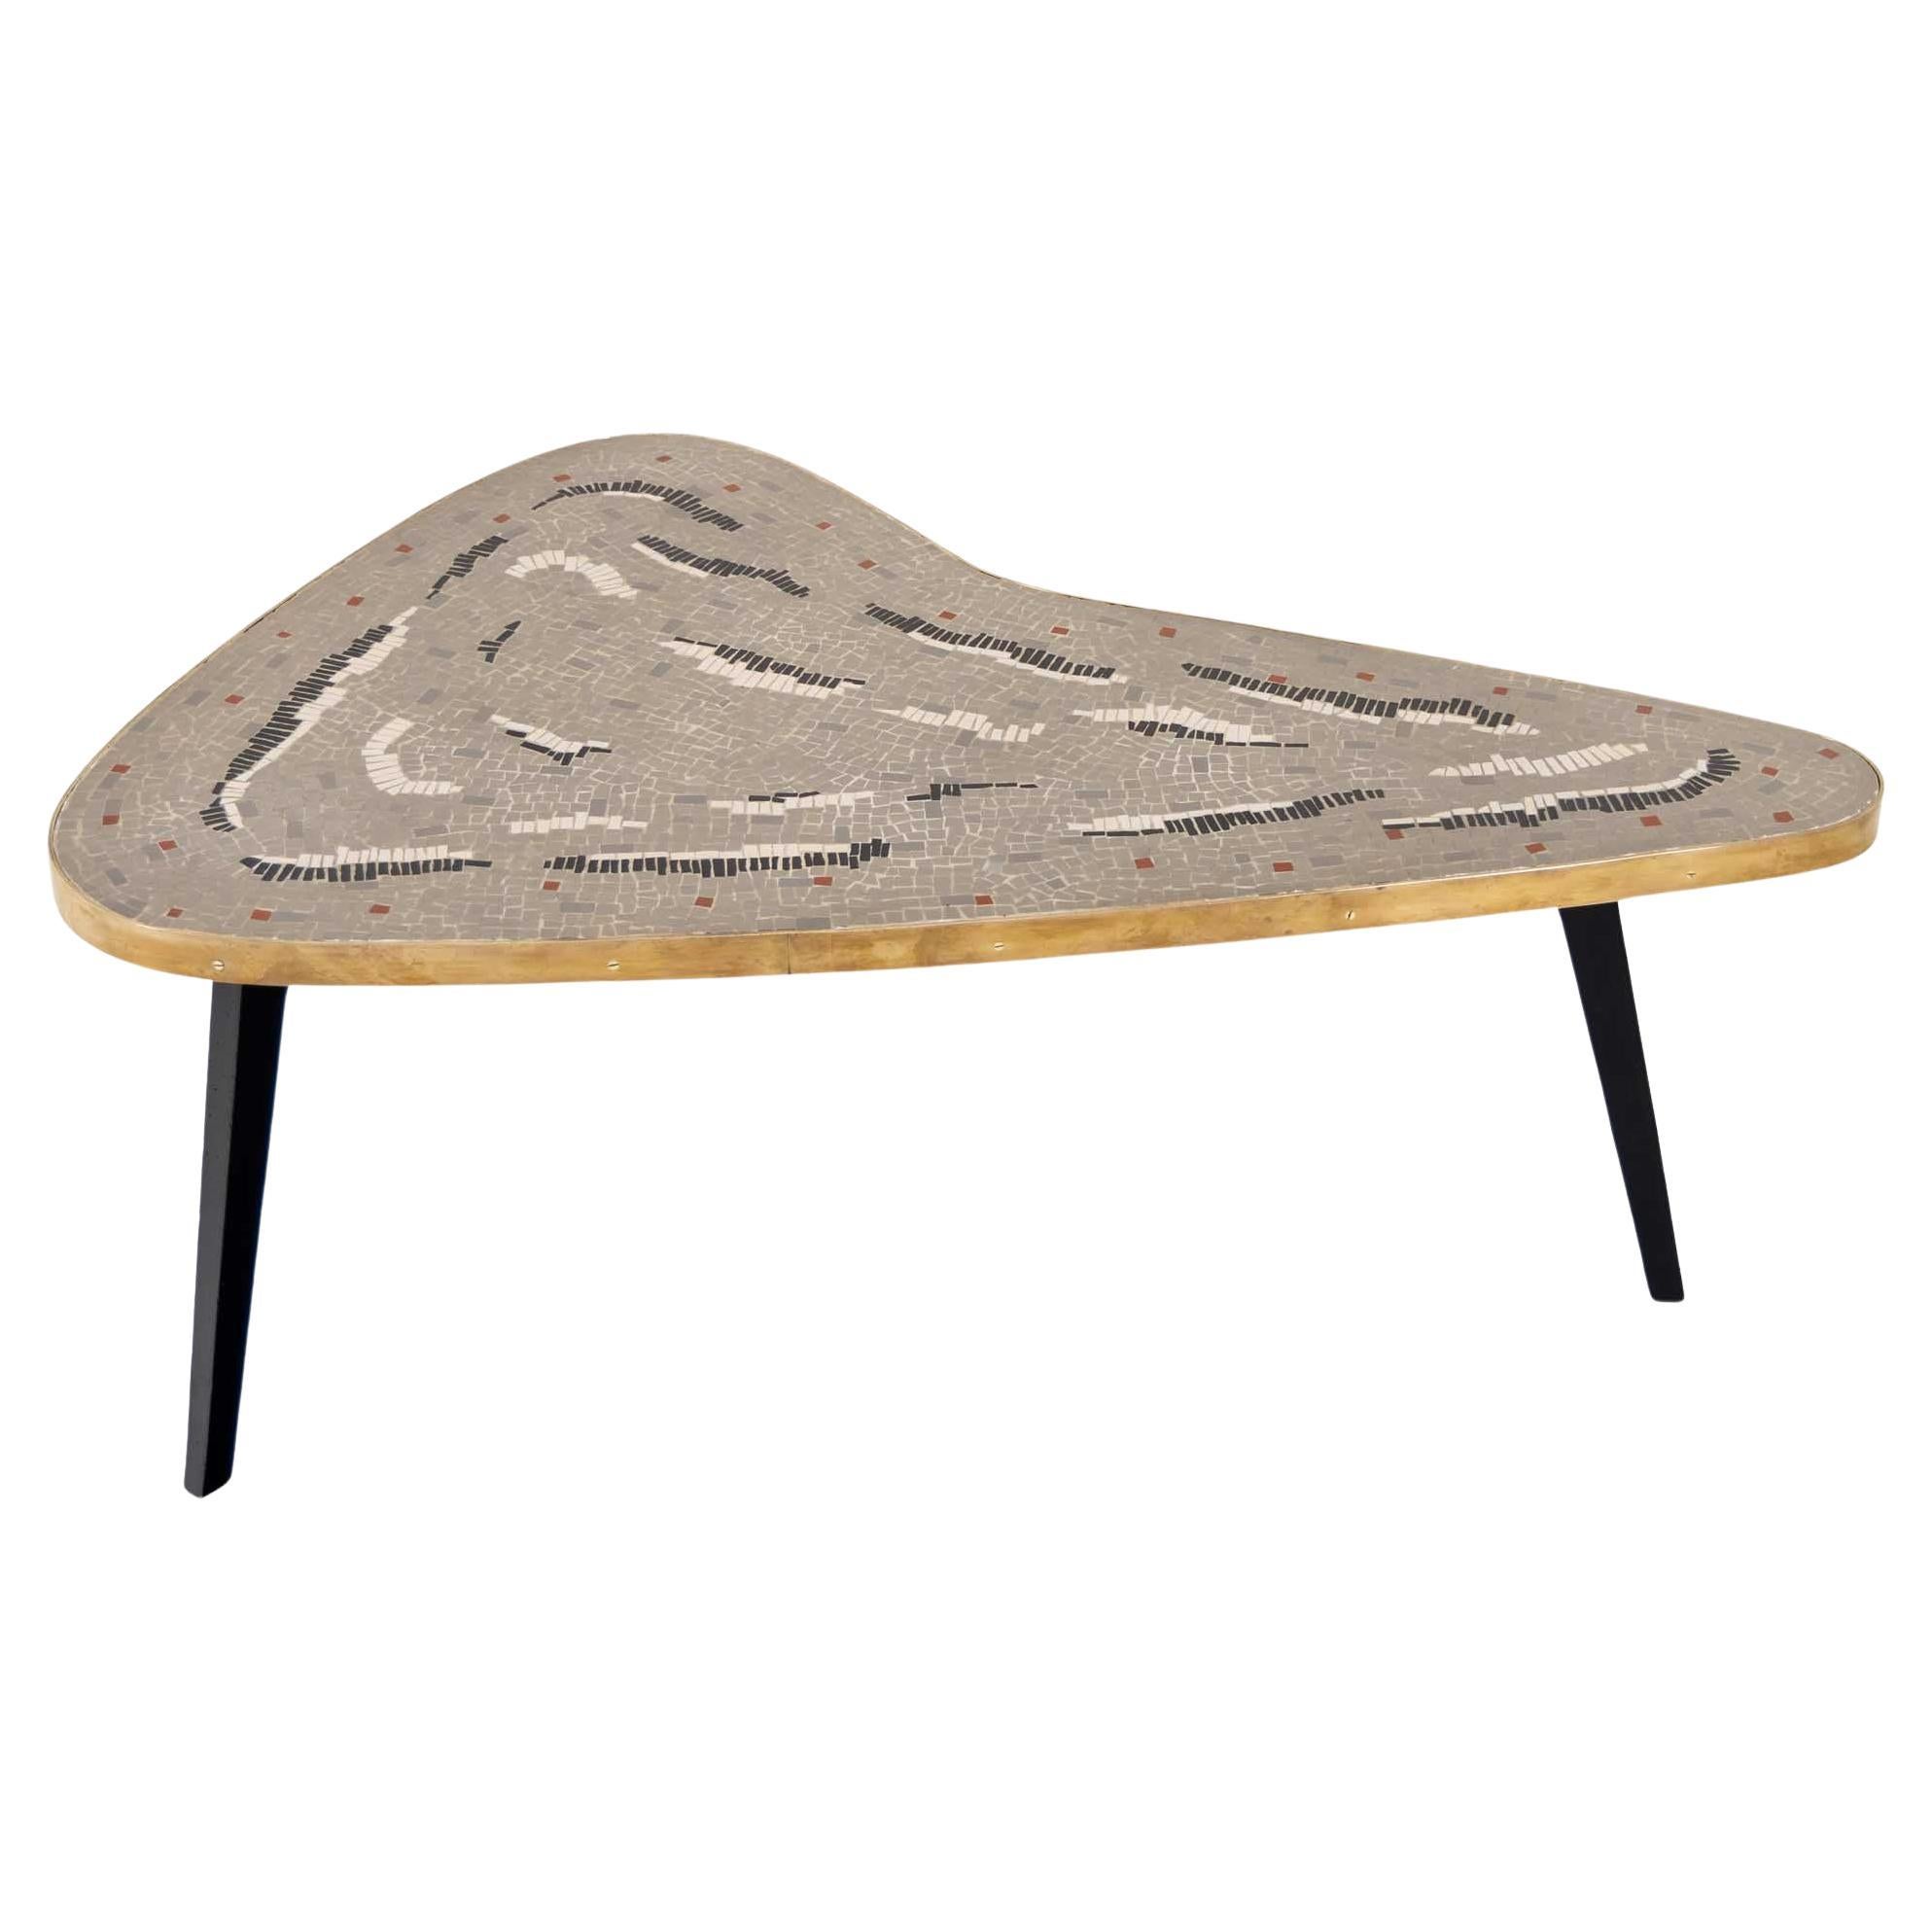 Table basse Boomerang, années 1960